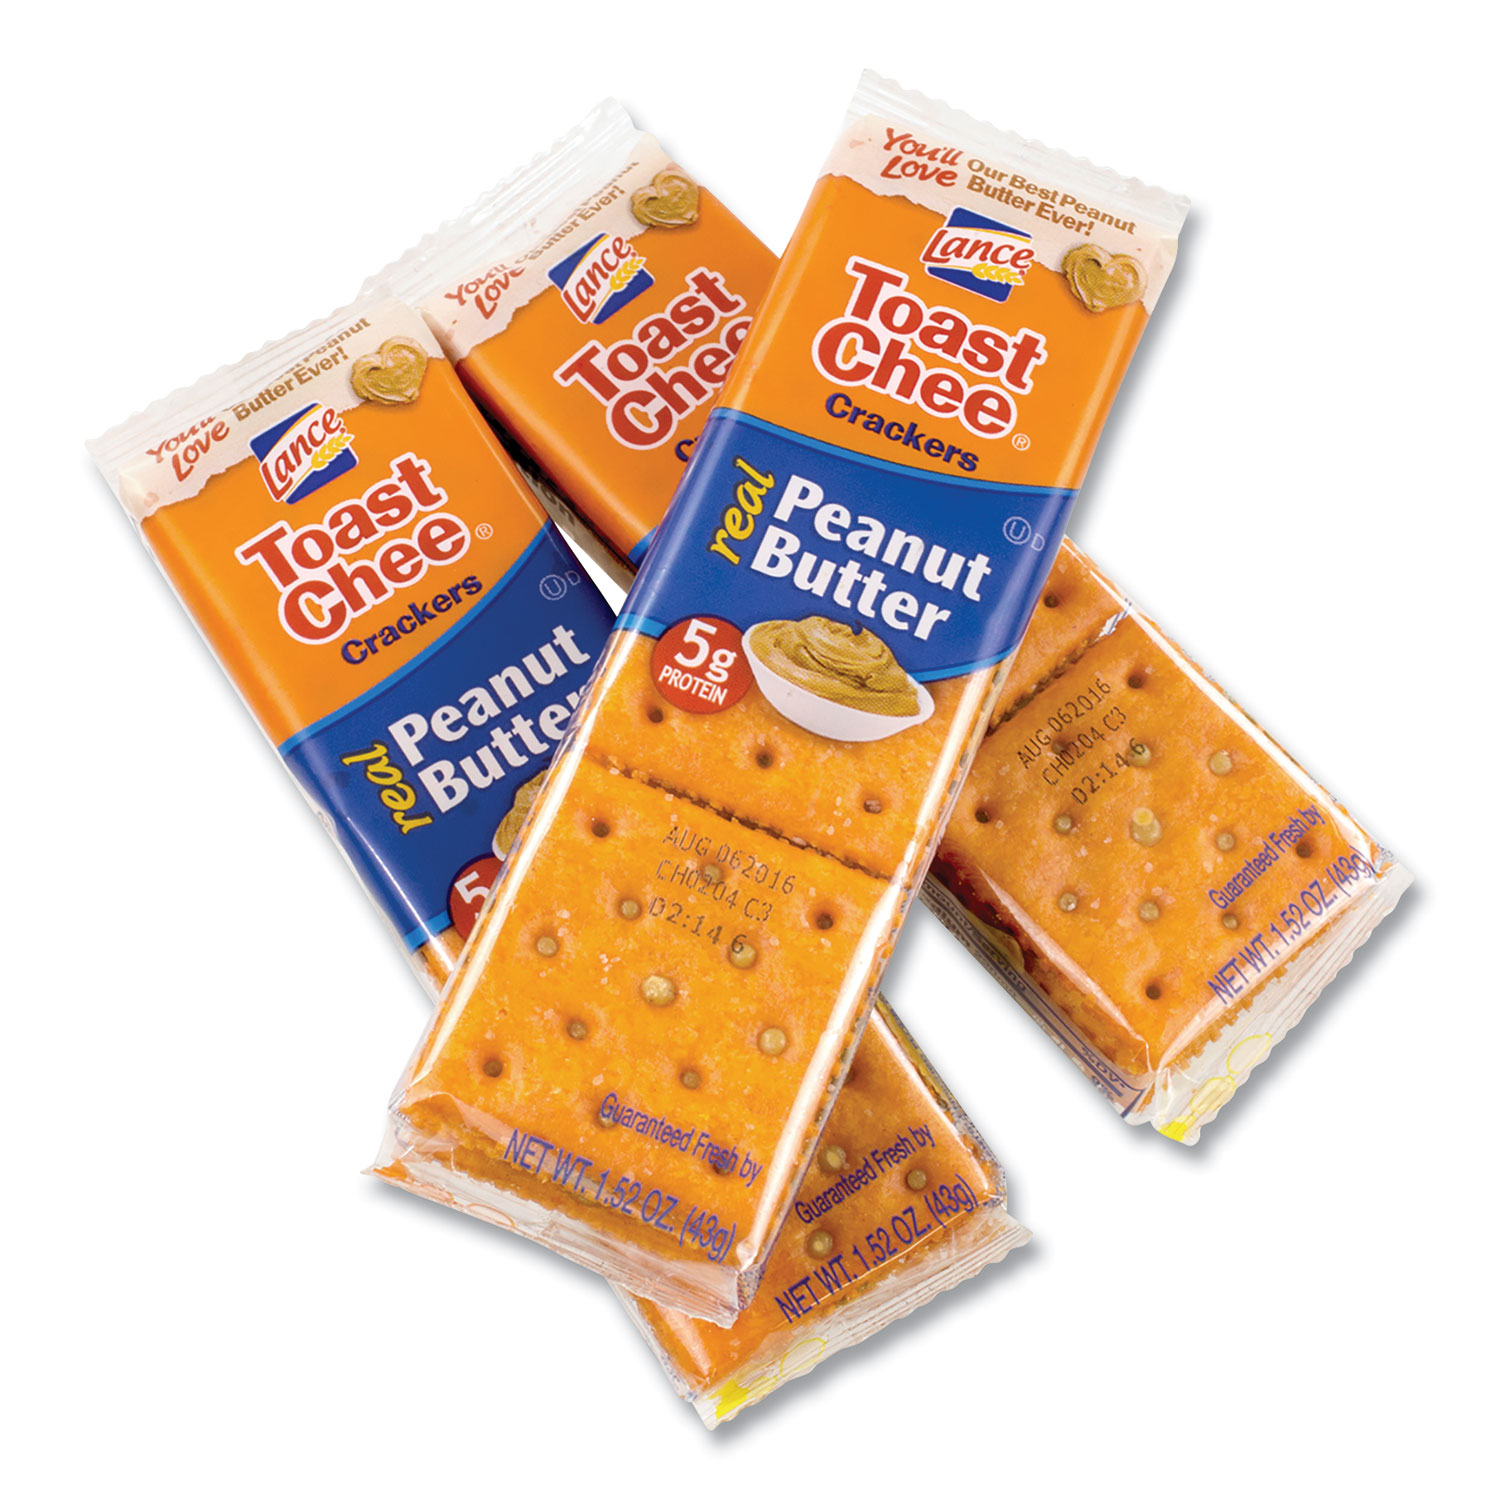  Lance 90147 Toast Chee Peanut Butter Cracker Sandwiches, 1.52 oz Pack, 40 Packs/Box, Free Delivery in 1-4 Business Days (GRR22000542) 